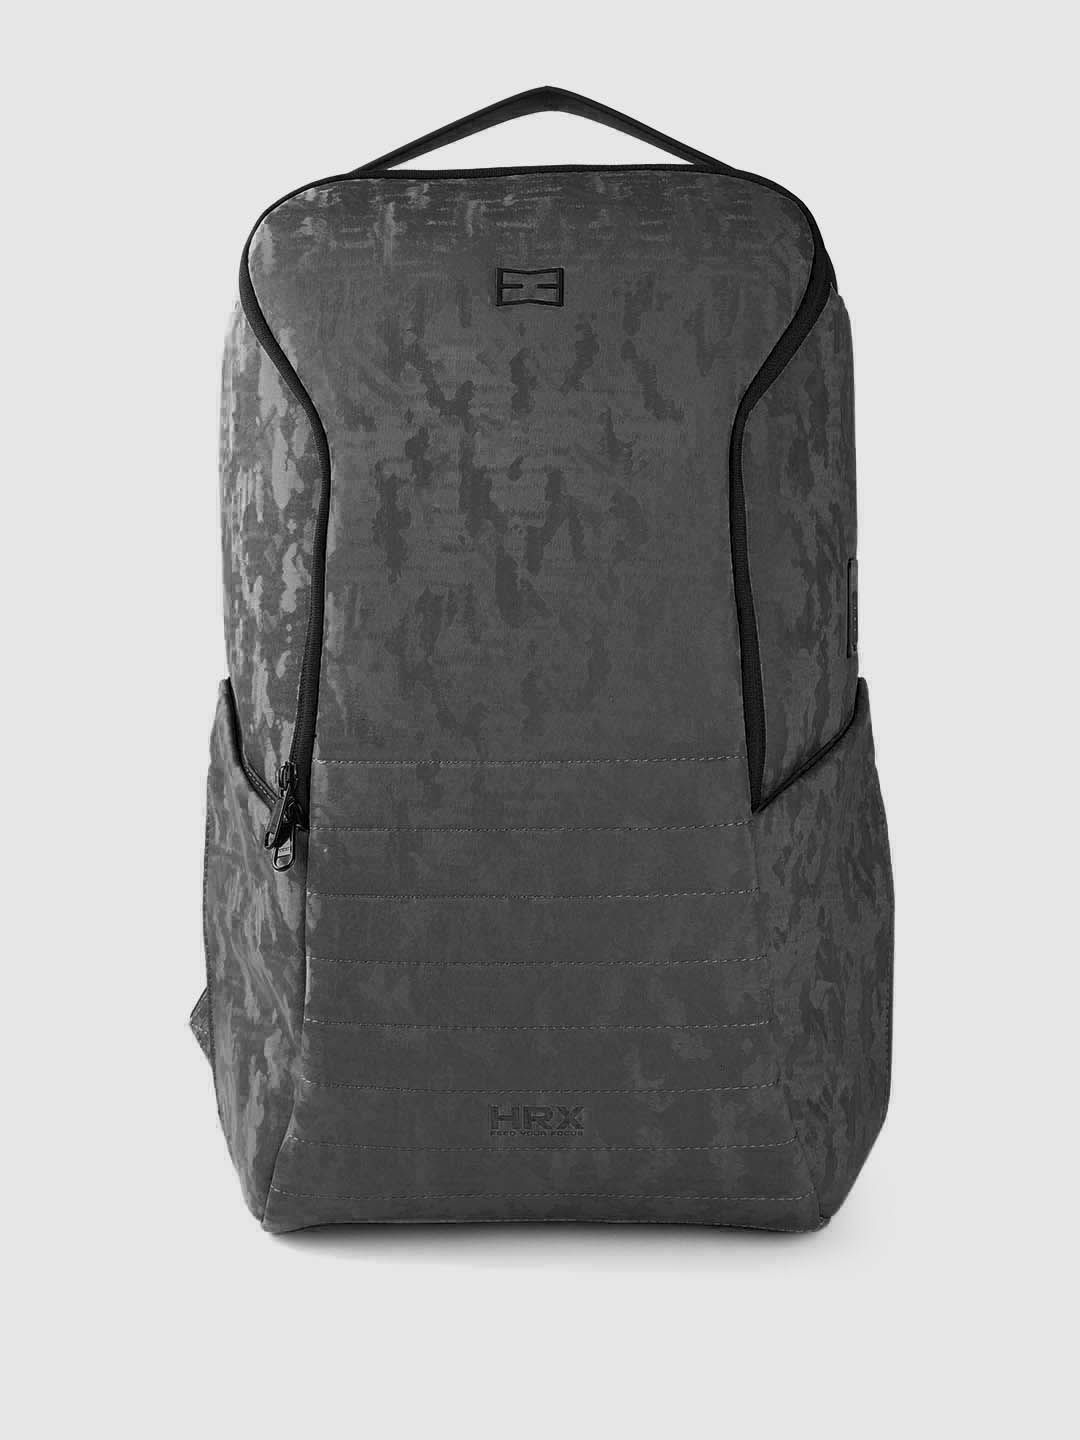 HRX by Hrithik Roshan Unisex Black Camouflage Print Unisex Backpack with USB Charging Port Price in India